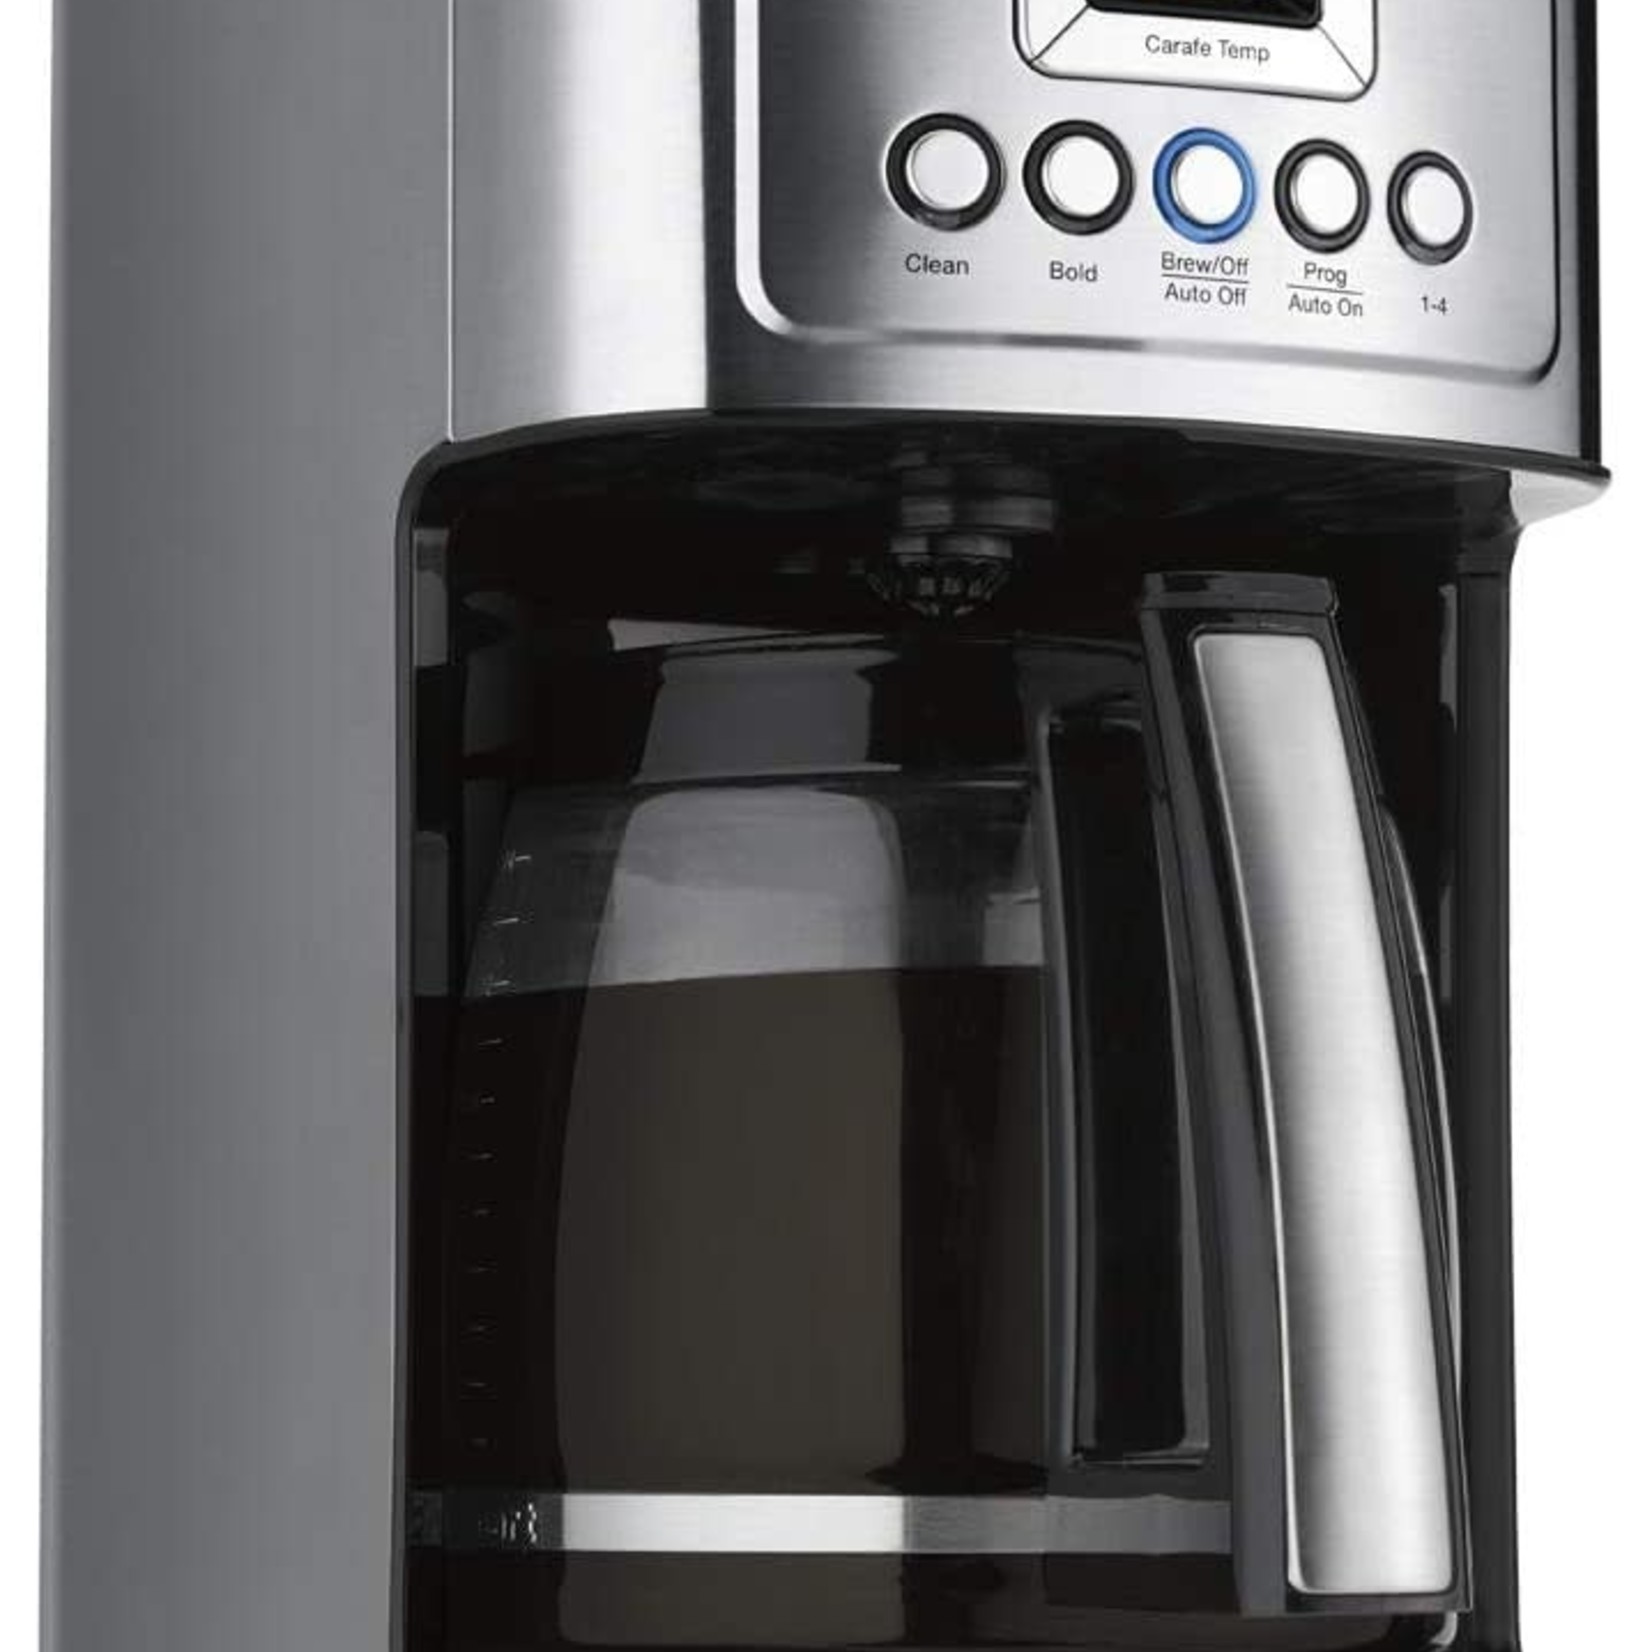 Cuisinart DCC-3200C 14-Cup Programmable Coffeemaker, Silver